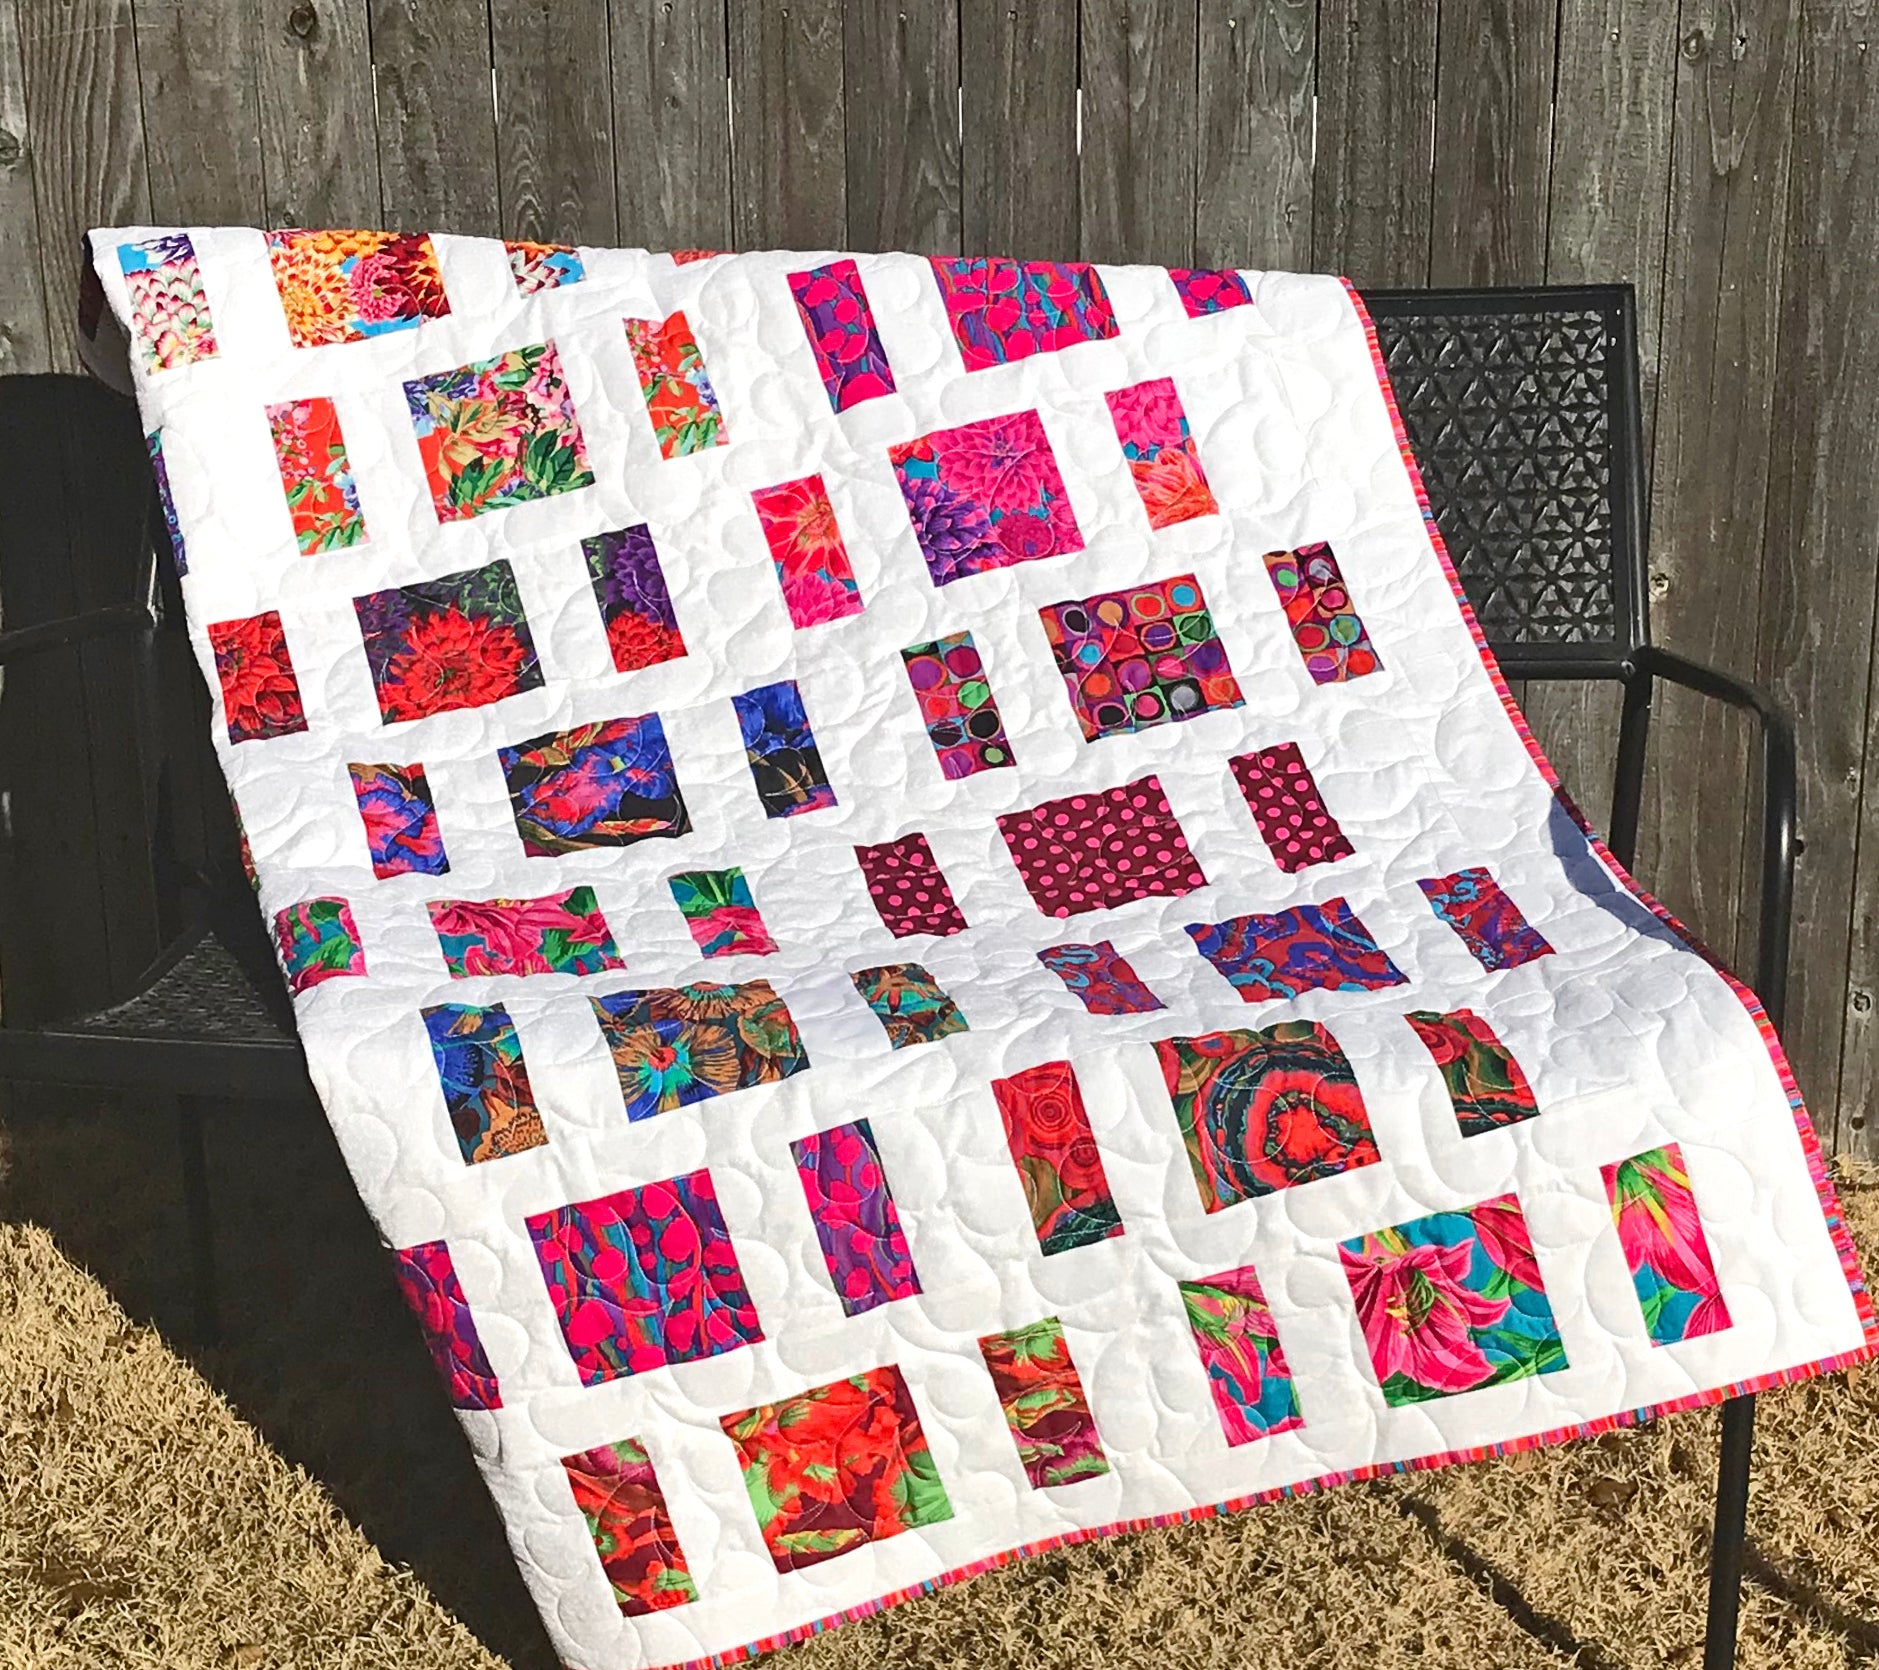 Quilt Pattern for charm squares that has nine columns of squares and rectangles with sashing between the columns. Quilt is displayed on a bench with colorful Kaffe Fassett fabrics.